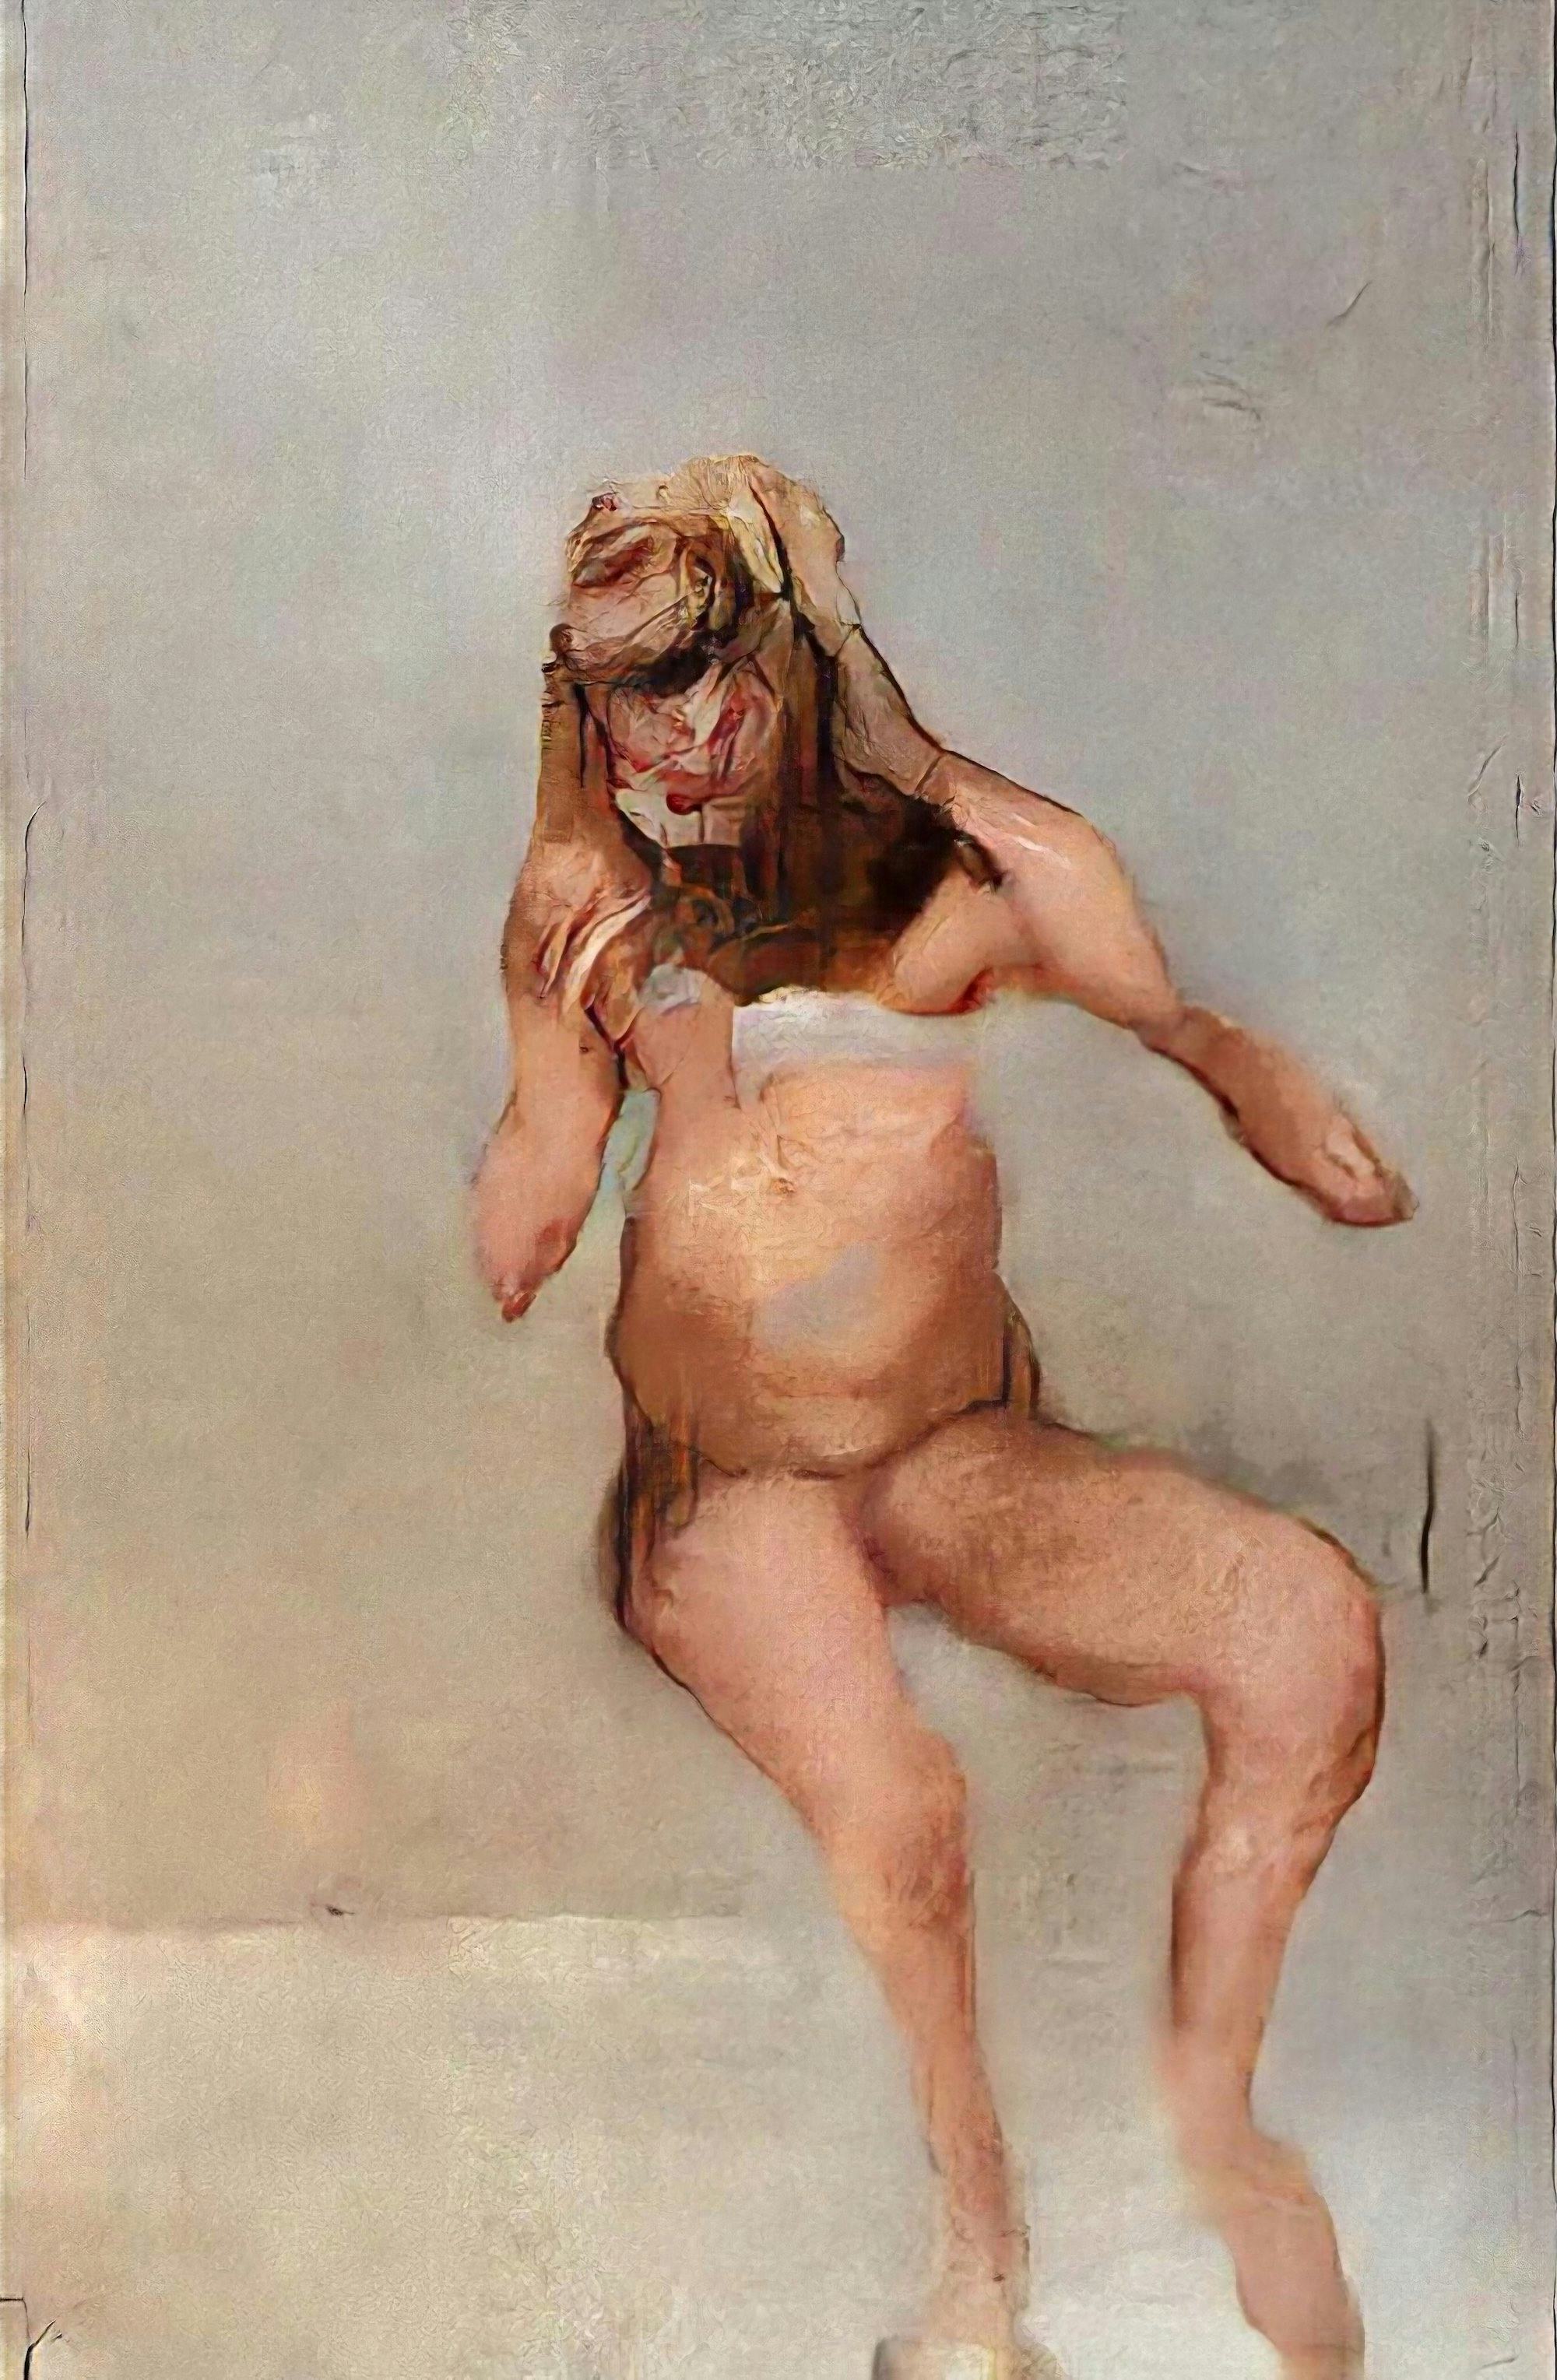 AI generated image showing a white human sitting down, disfigured and unfinished © Mario Klingemann